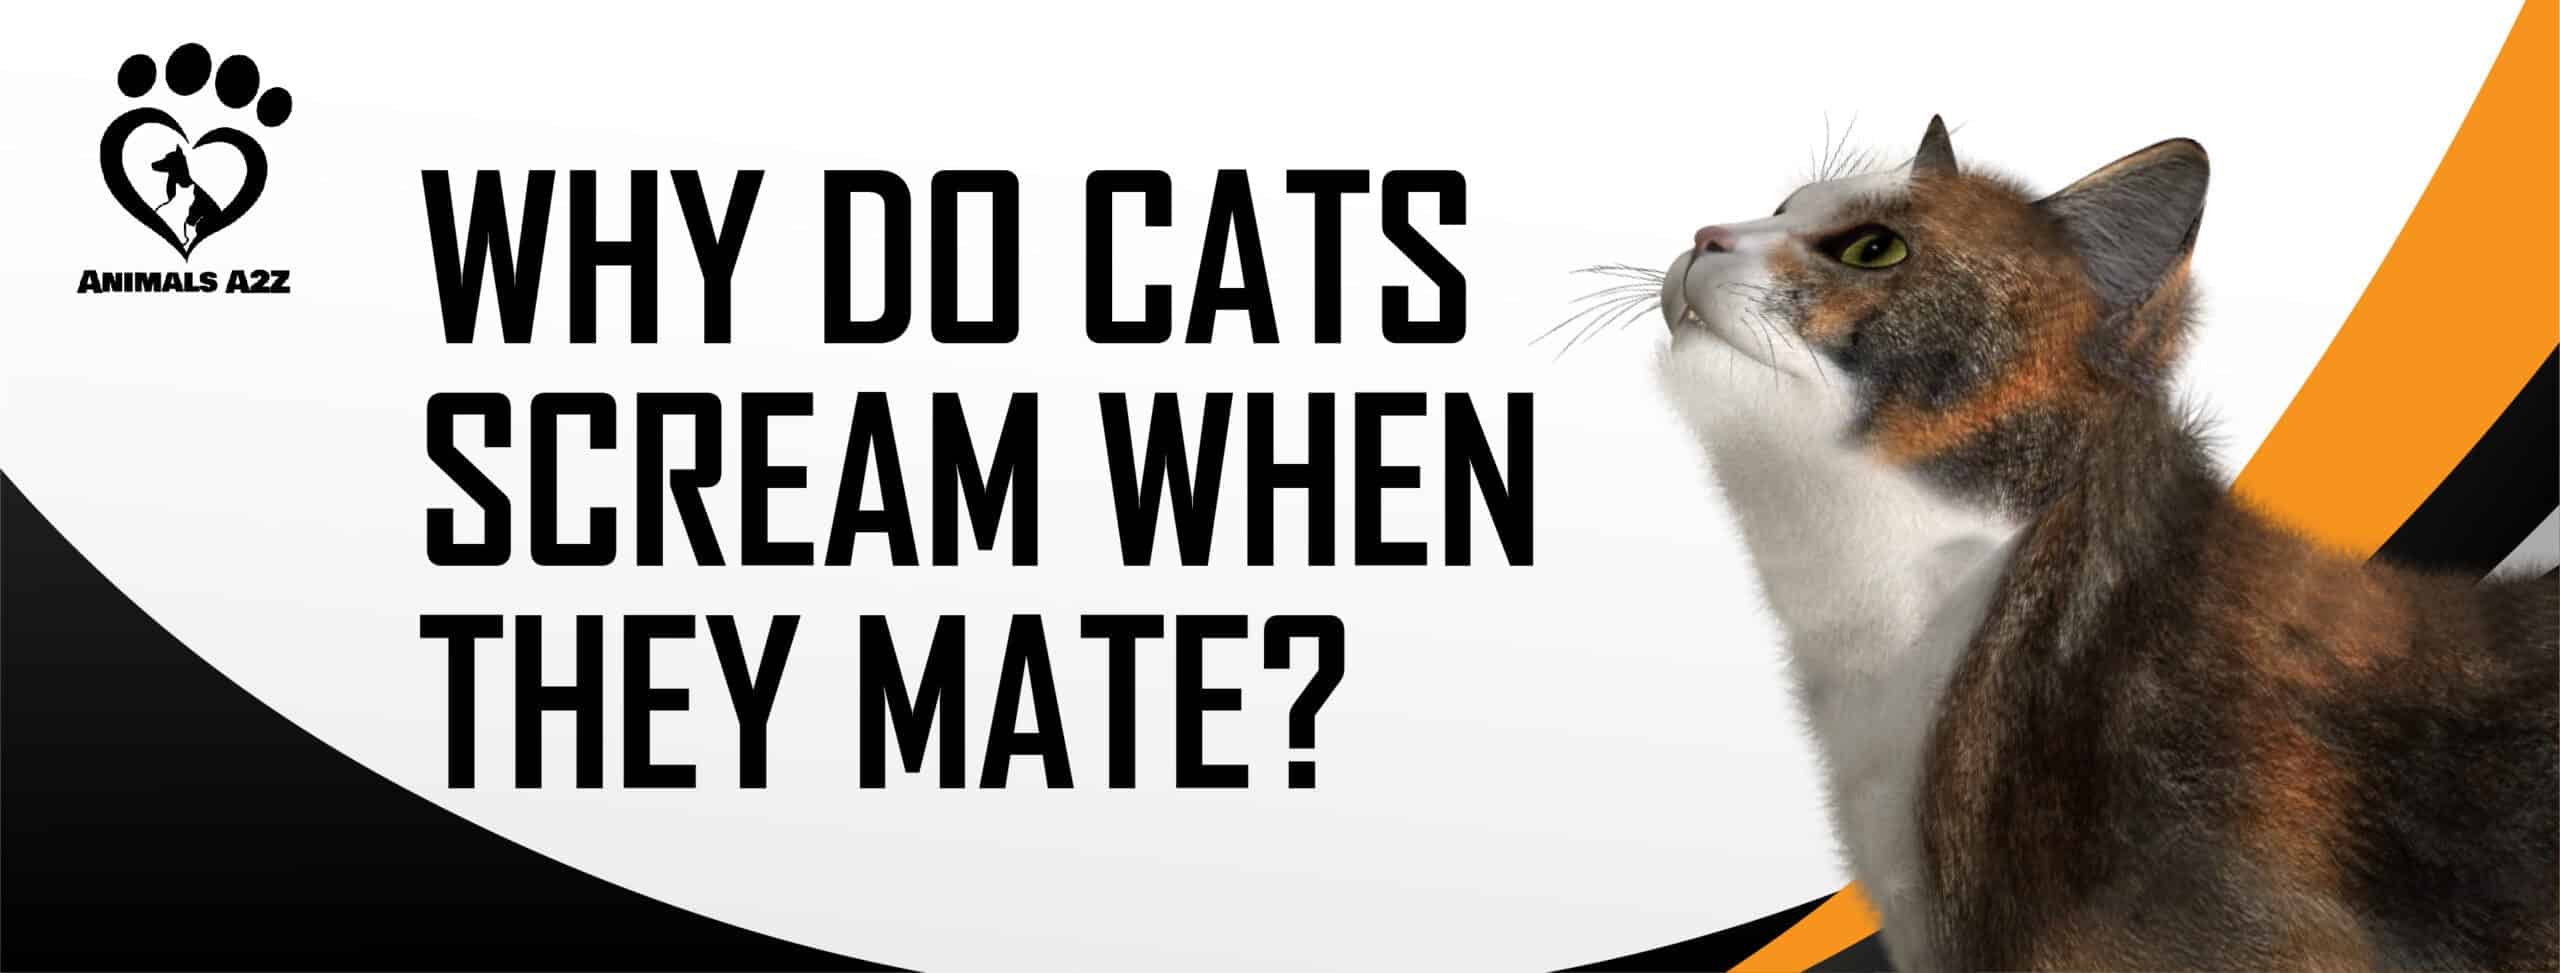 Why do cats scream when they mate